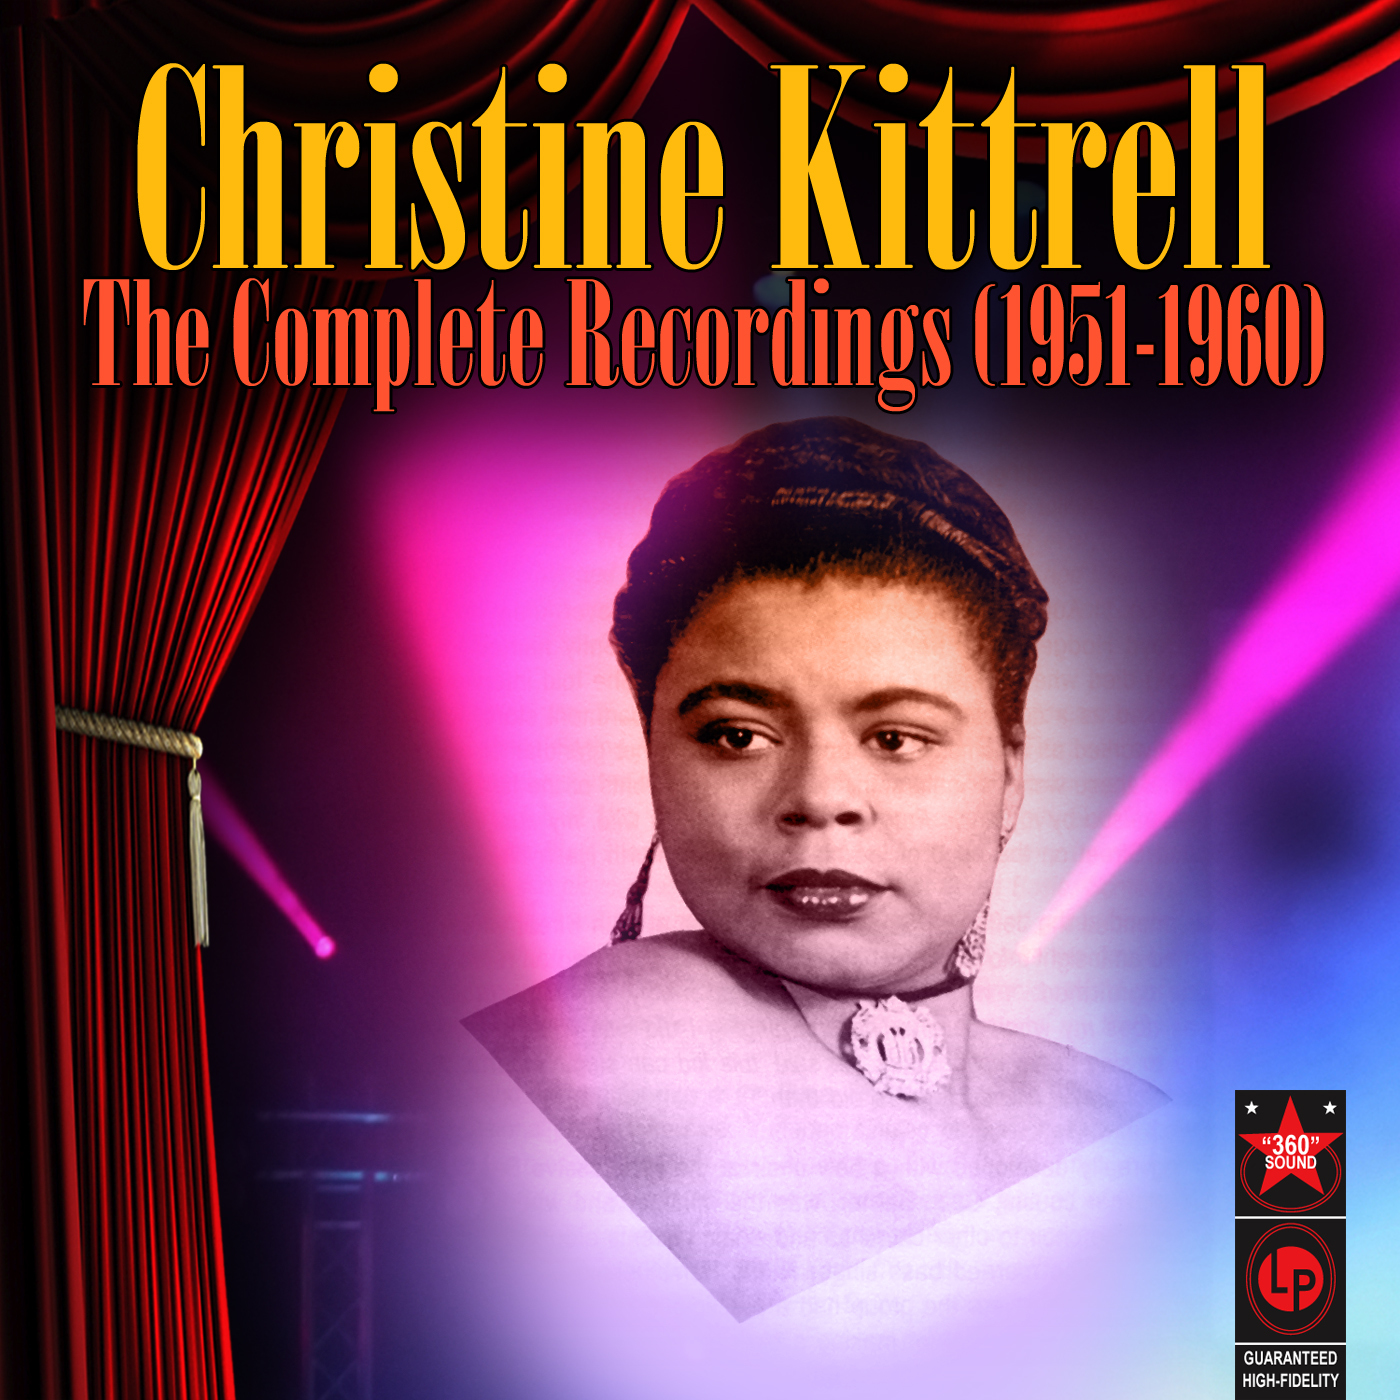 The Complete Recordings (1953-1960)